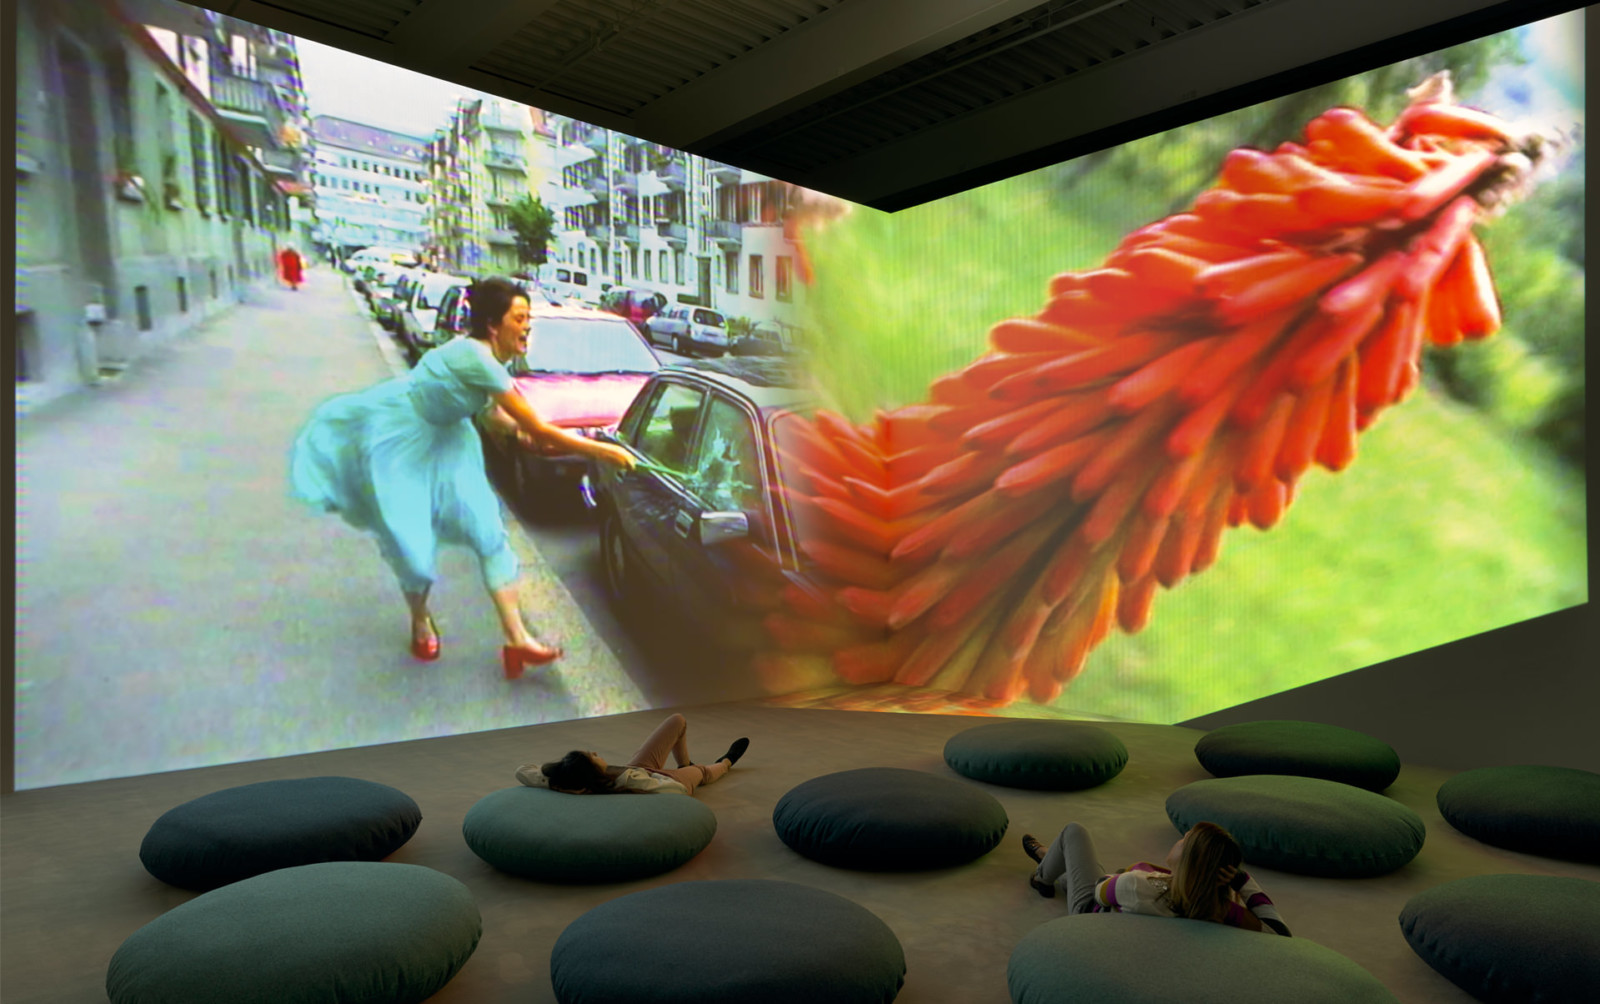 This was Pipilotti Rist’s amusing Ever is over all